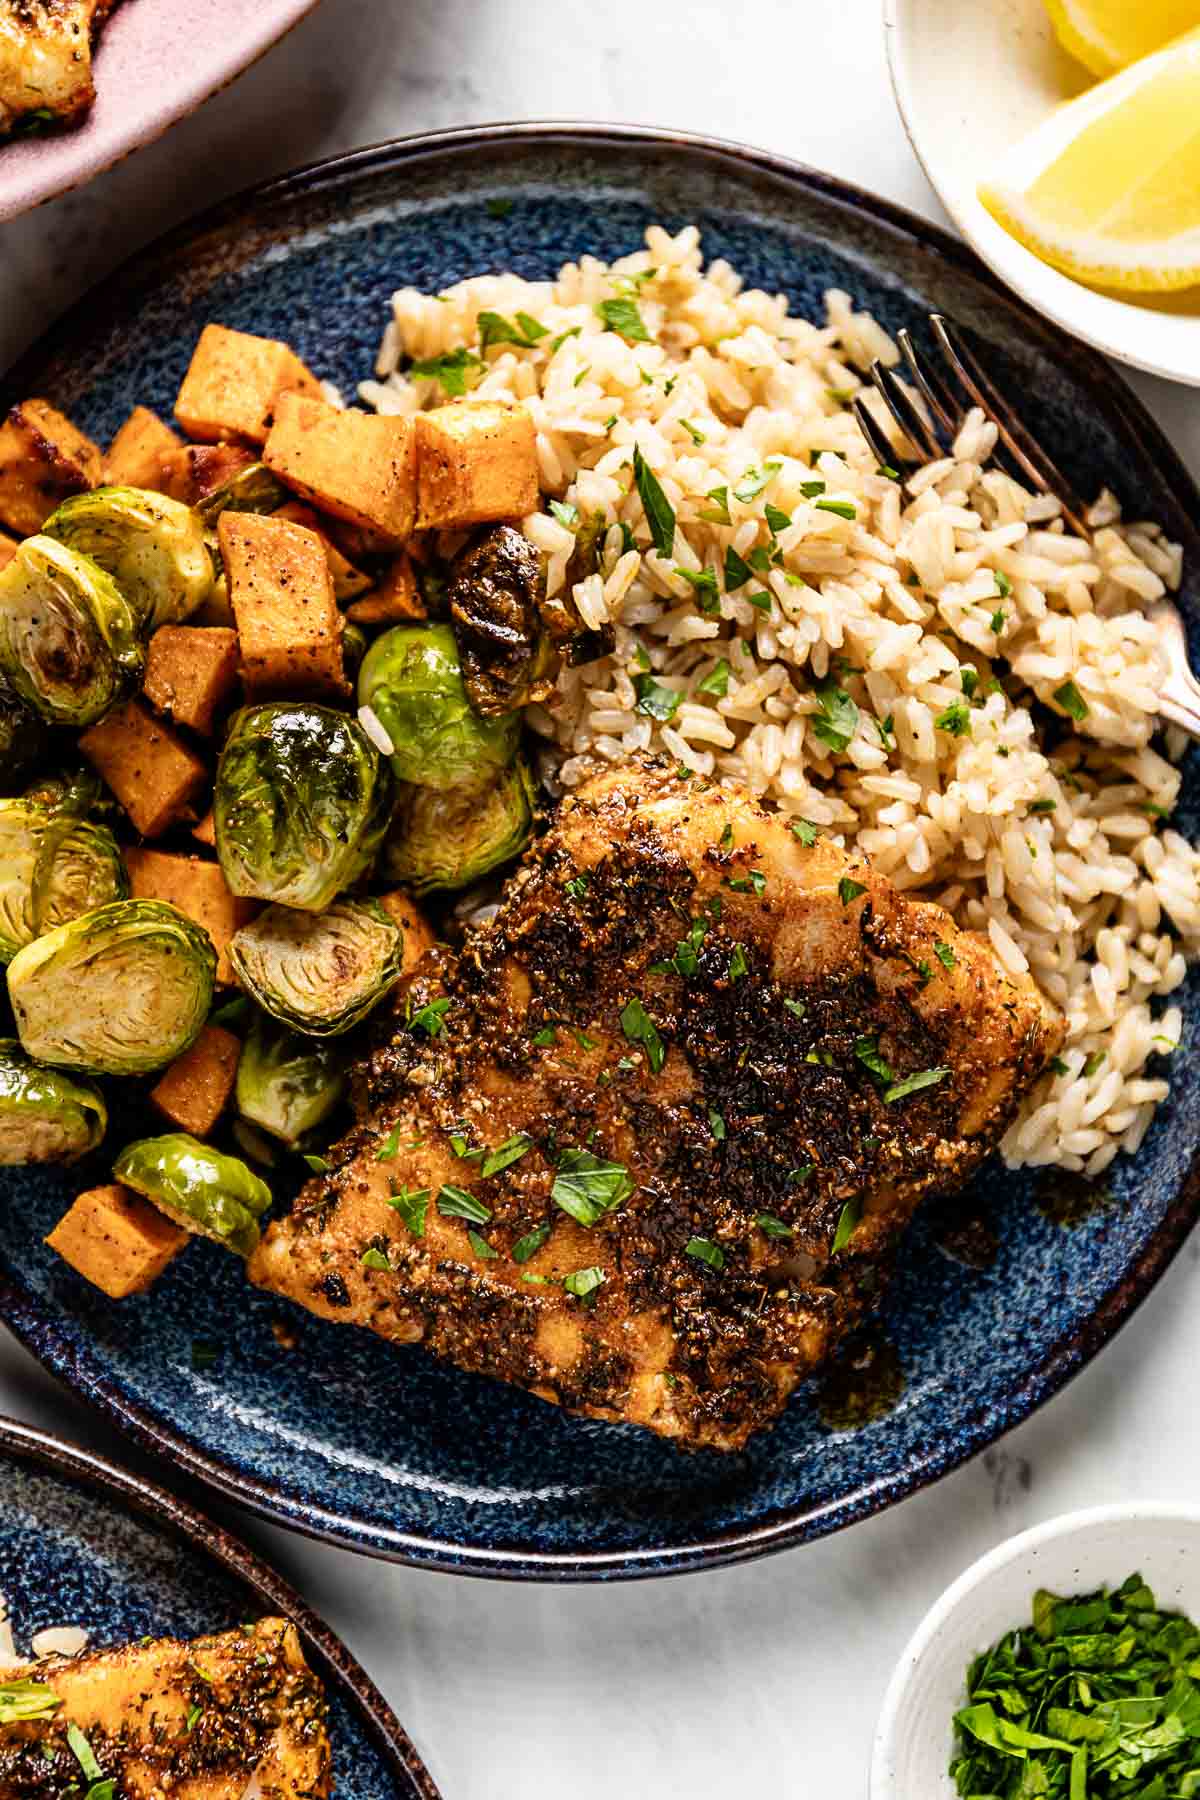 Baked blackened cod served with rice and roasted vegetables on a plate.